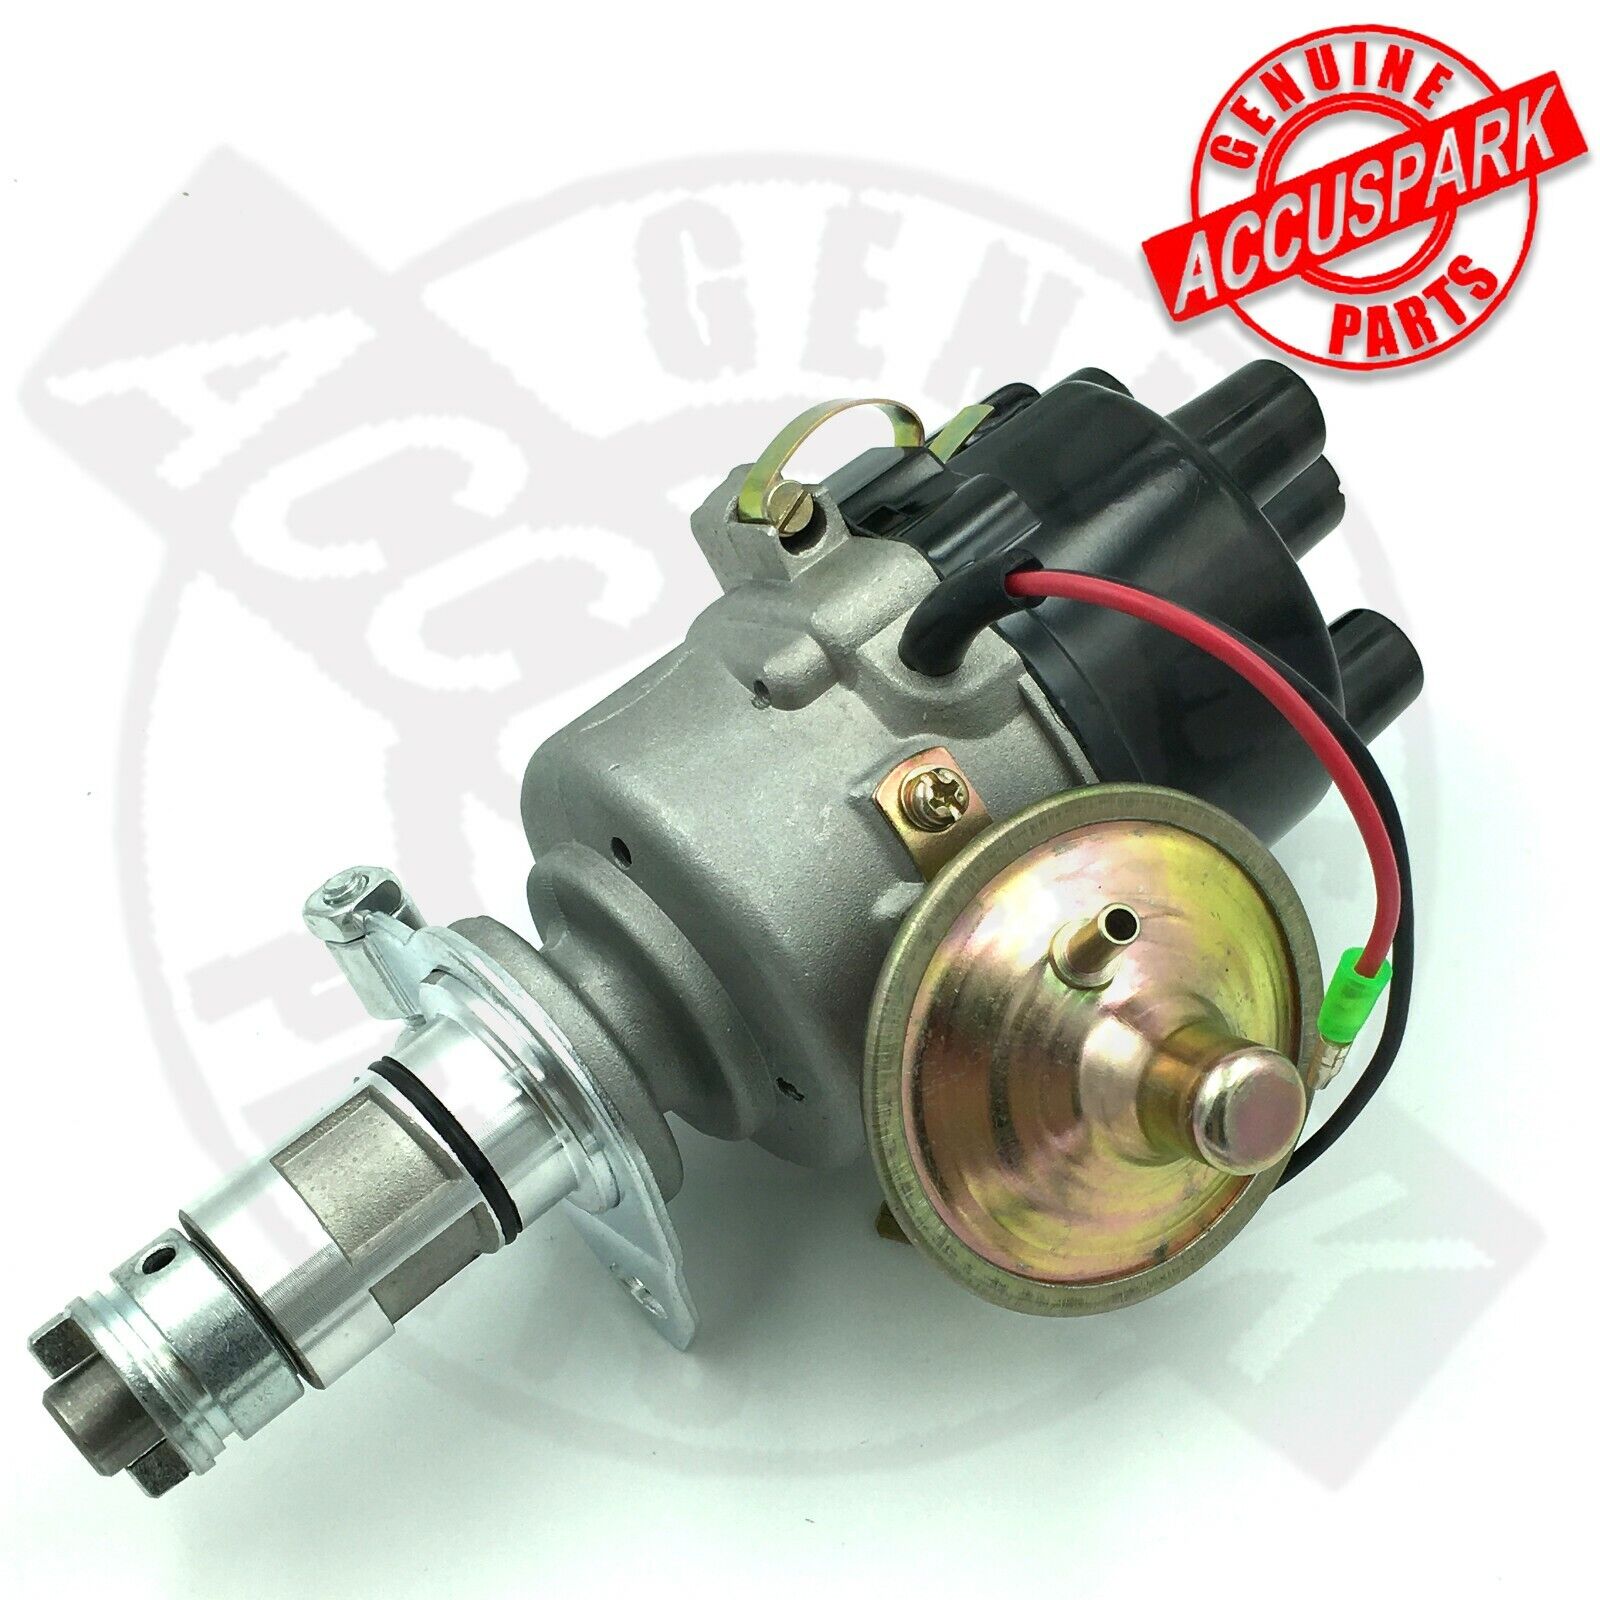  MGB Distributor ALL years with AccuSpark™ Electronic ignition Negative Ground 